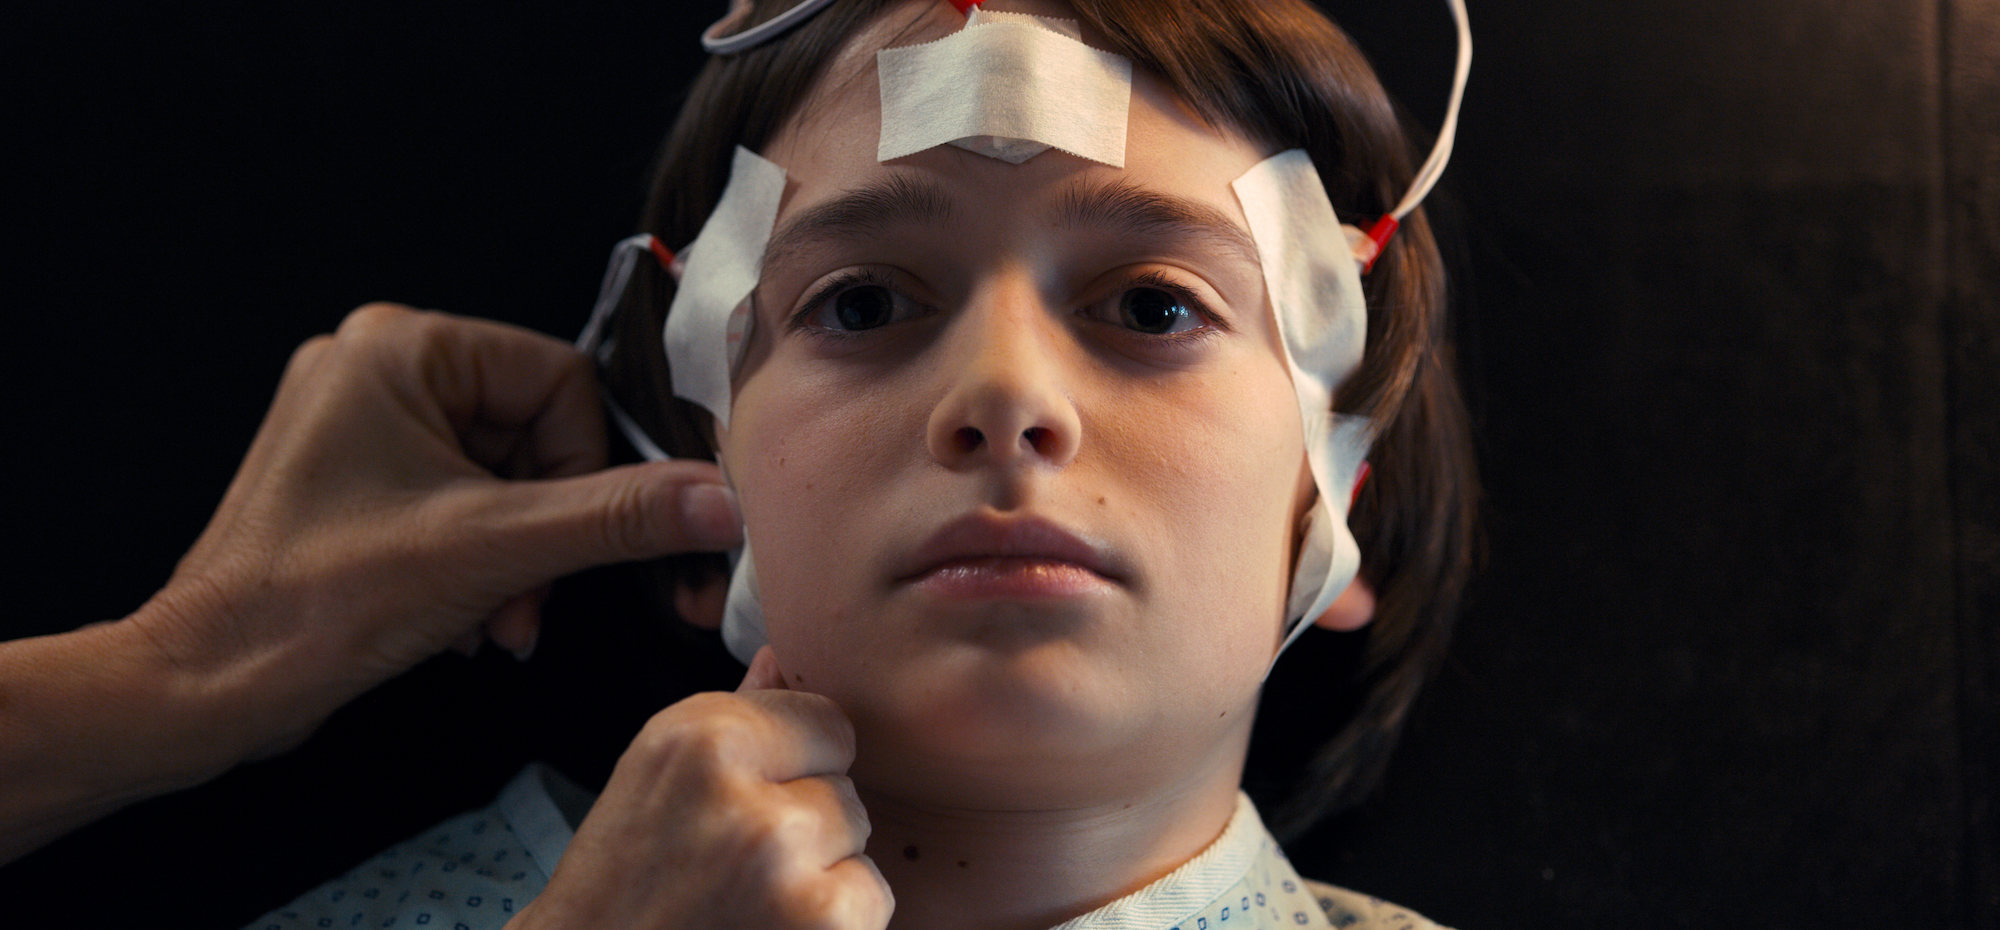 This 'Stranger Things' Season 2 recap features Noah Schnapp, as Will Byers, seen here with wires taped to his head in a production still from the series.